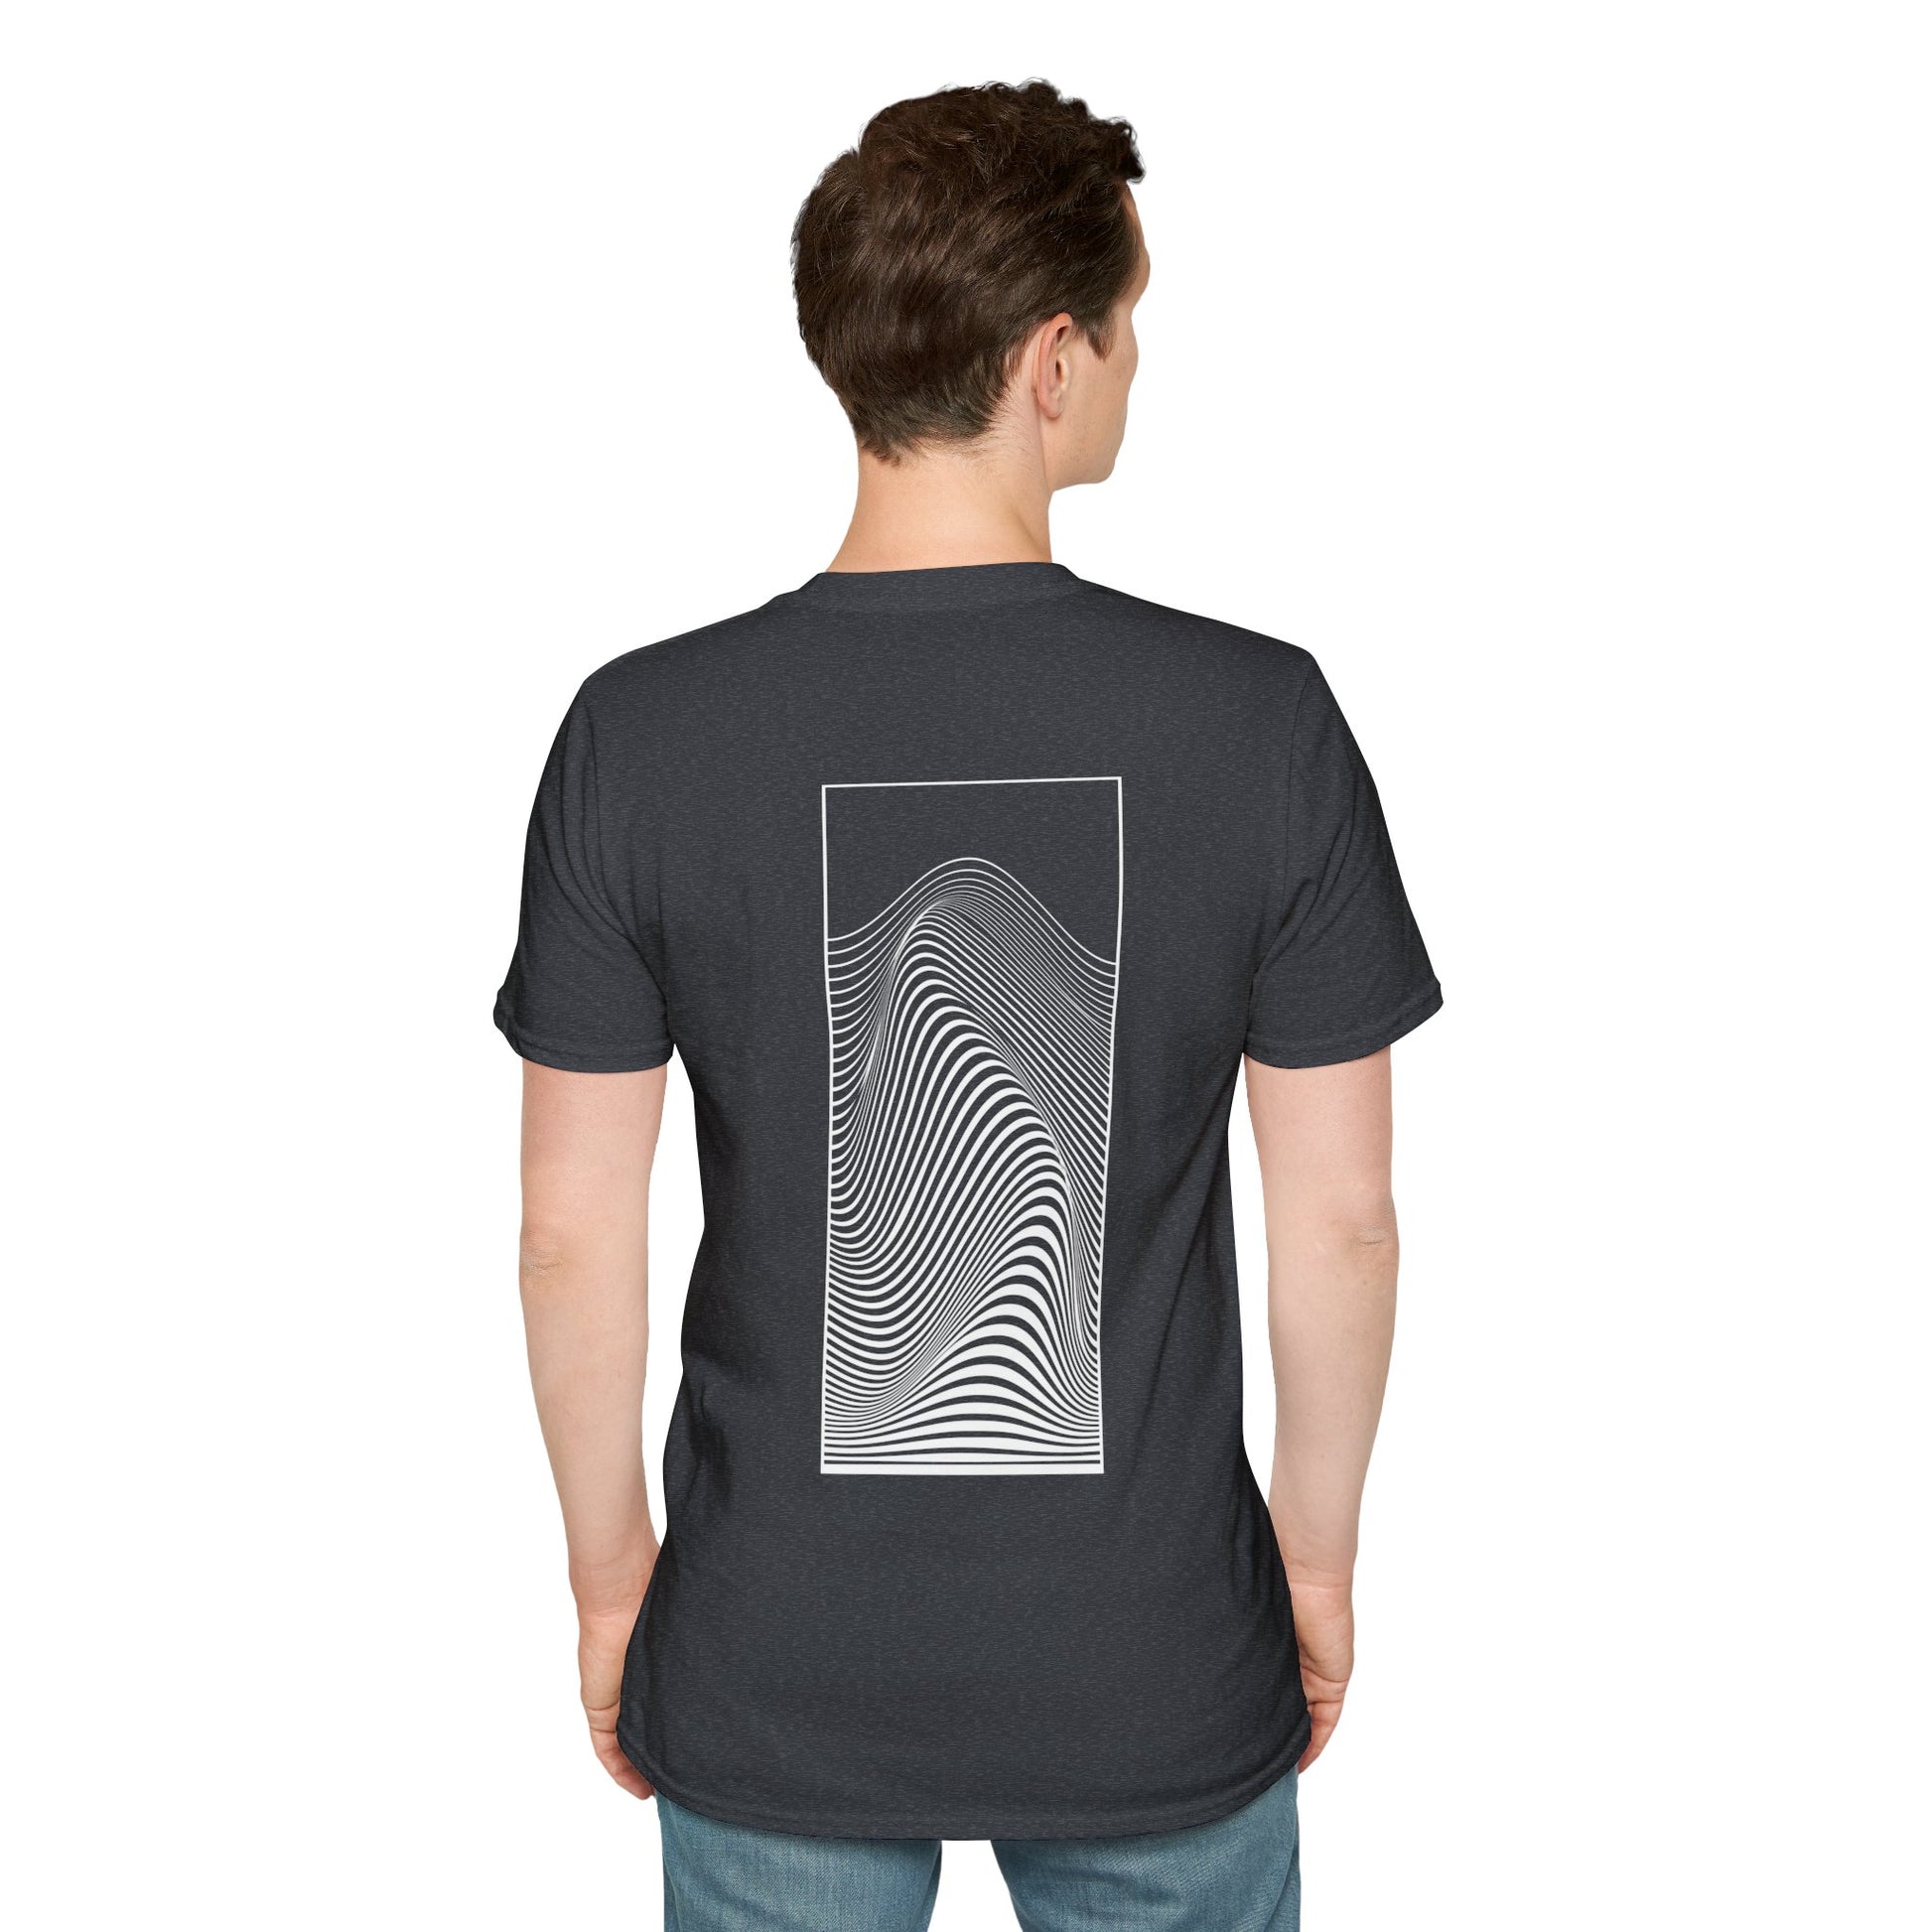 Dark Grey T-shirt with a black and white optical illusion design of swirling patterns